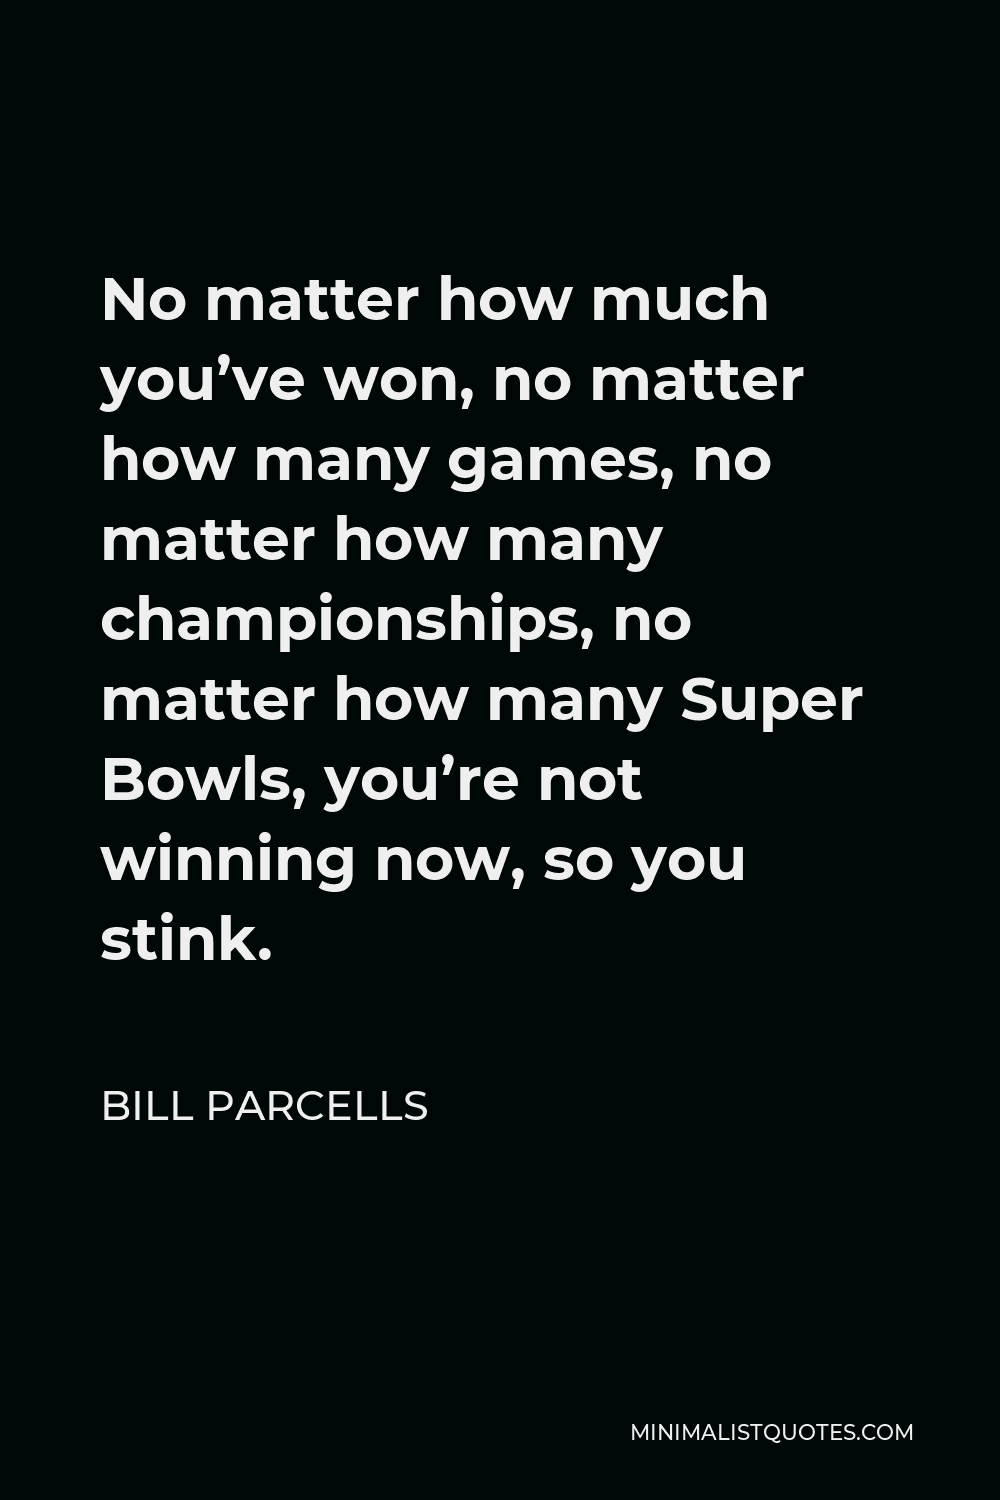 Bill Parcells Quote - No matter how much you’ve won, no matter how many games, no matter how many championships, no matter how many Super Bowls, you’re not winning now, so you stink.